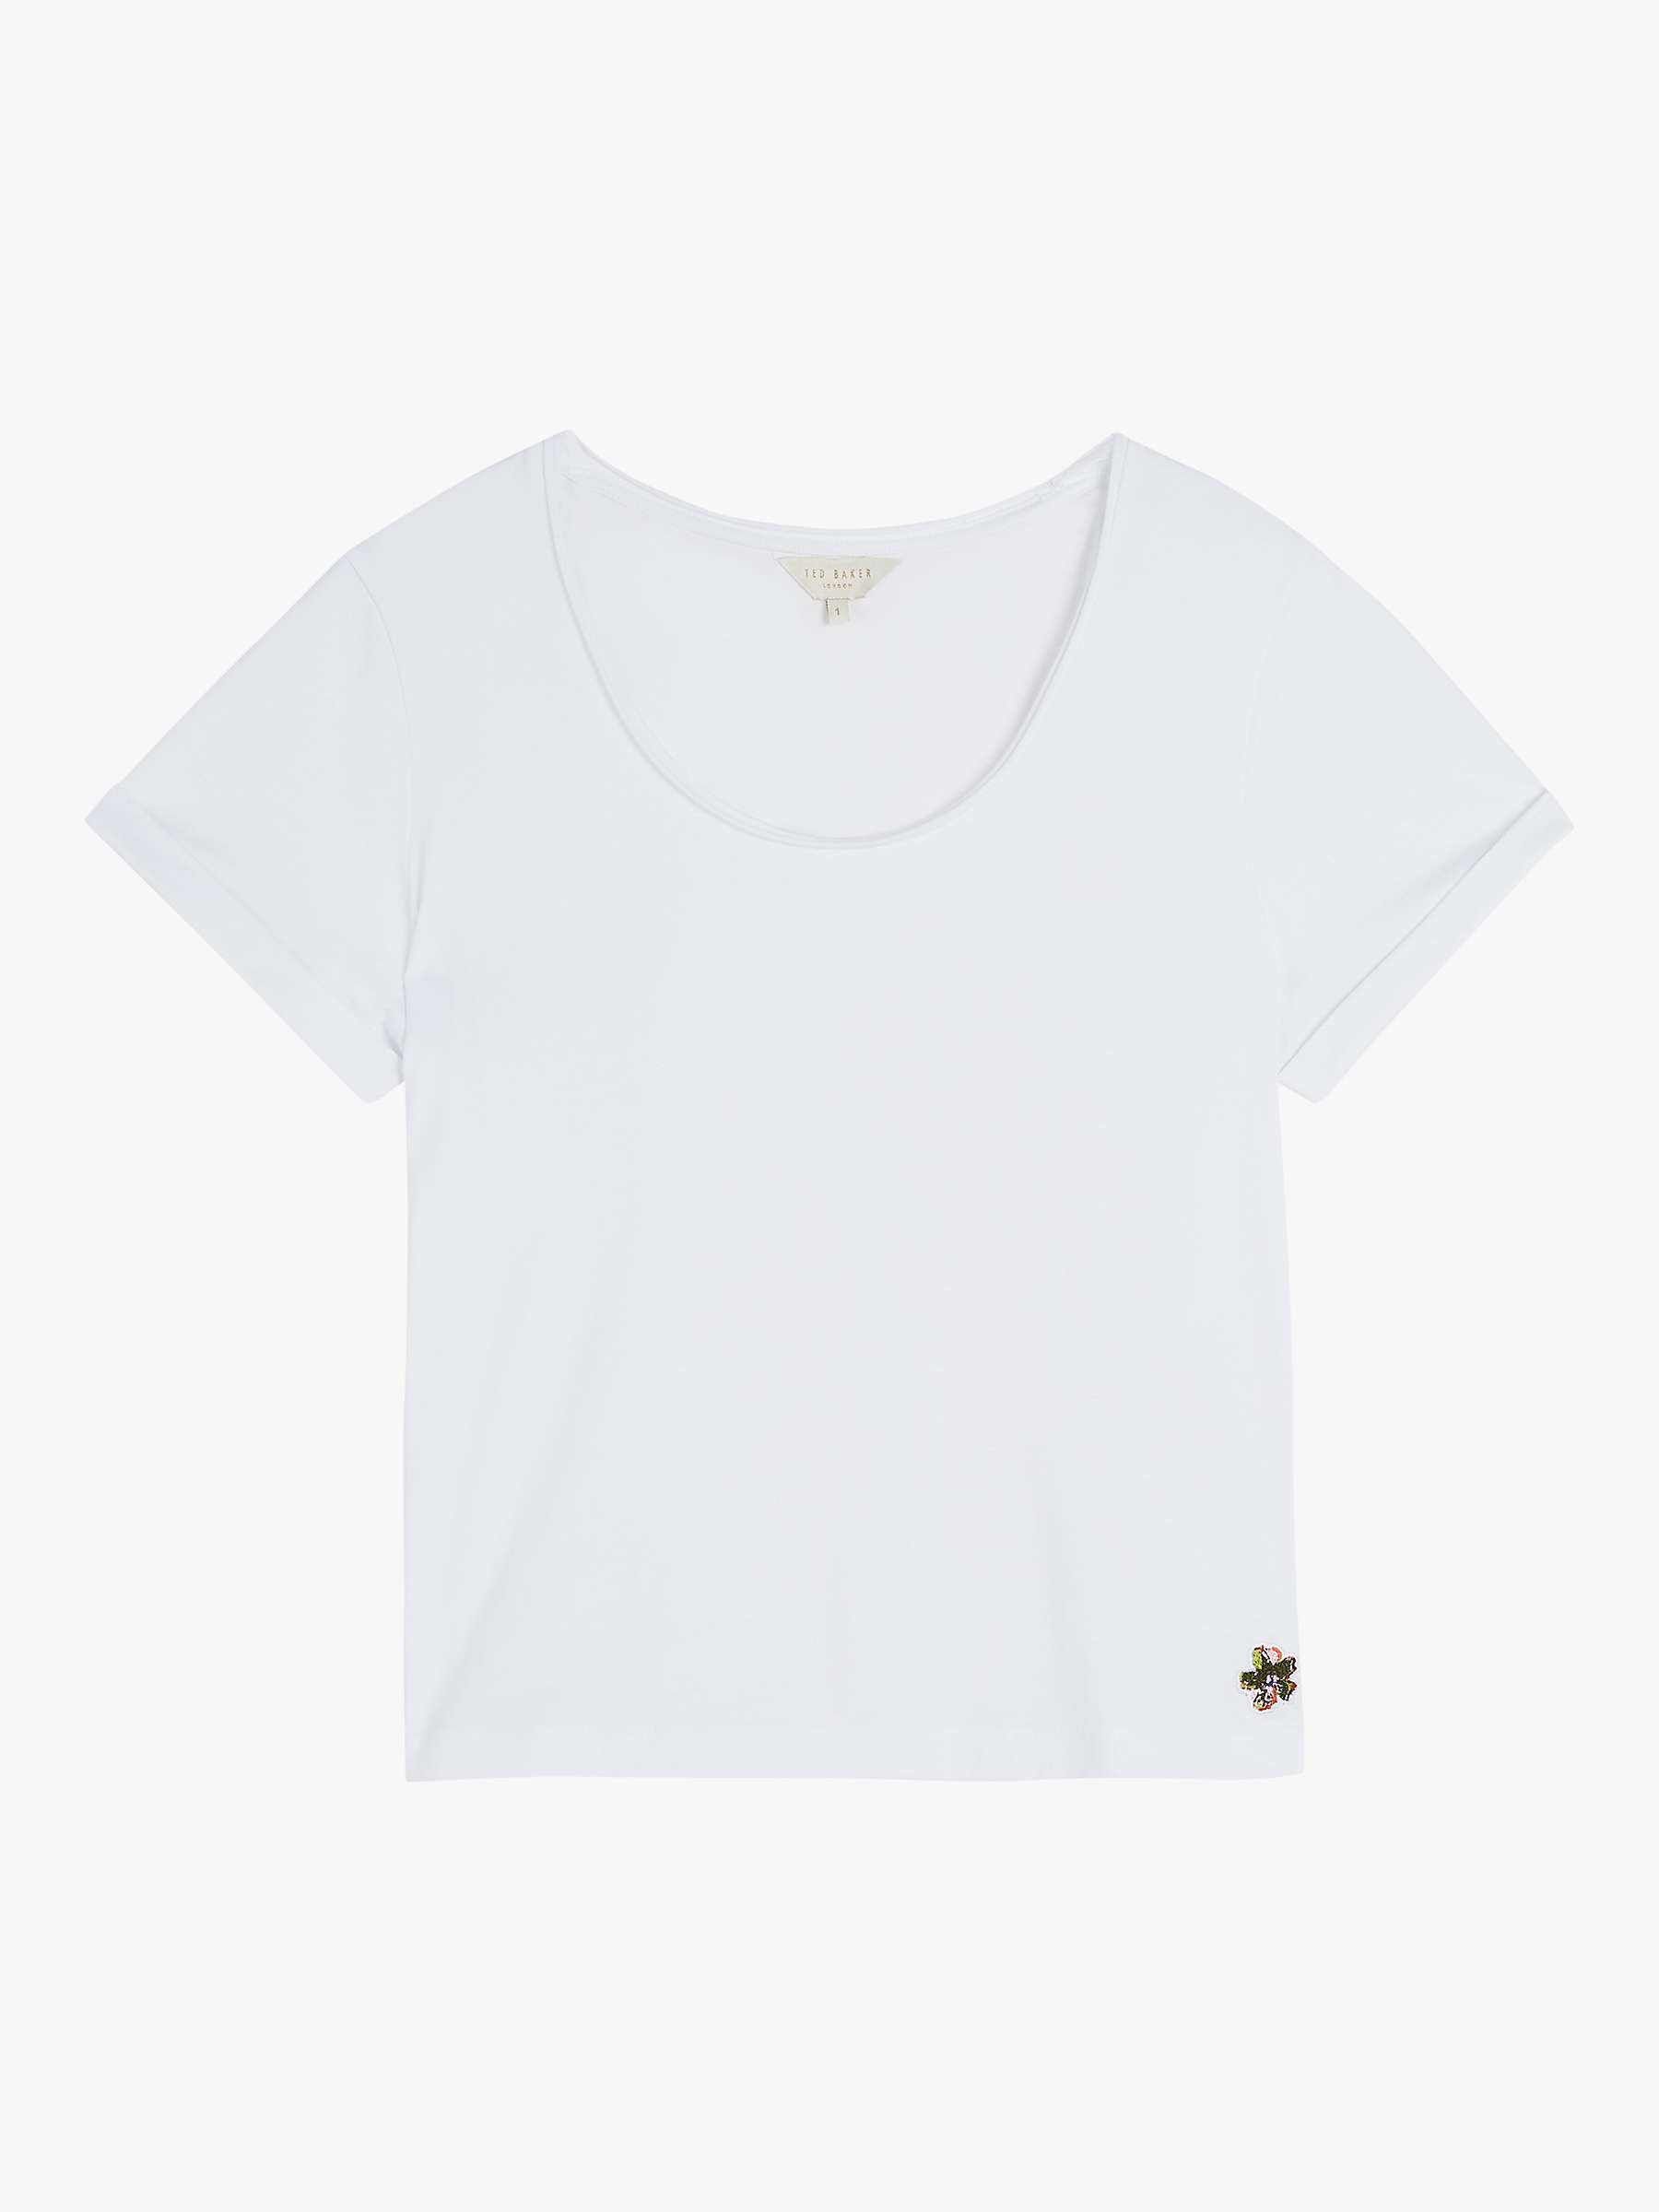 Buy Ted Baker Easy Fit Cotton T-Shirt Online at johnlewis.com